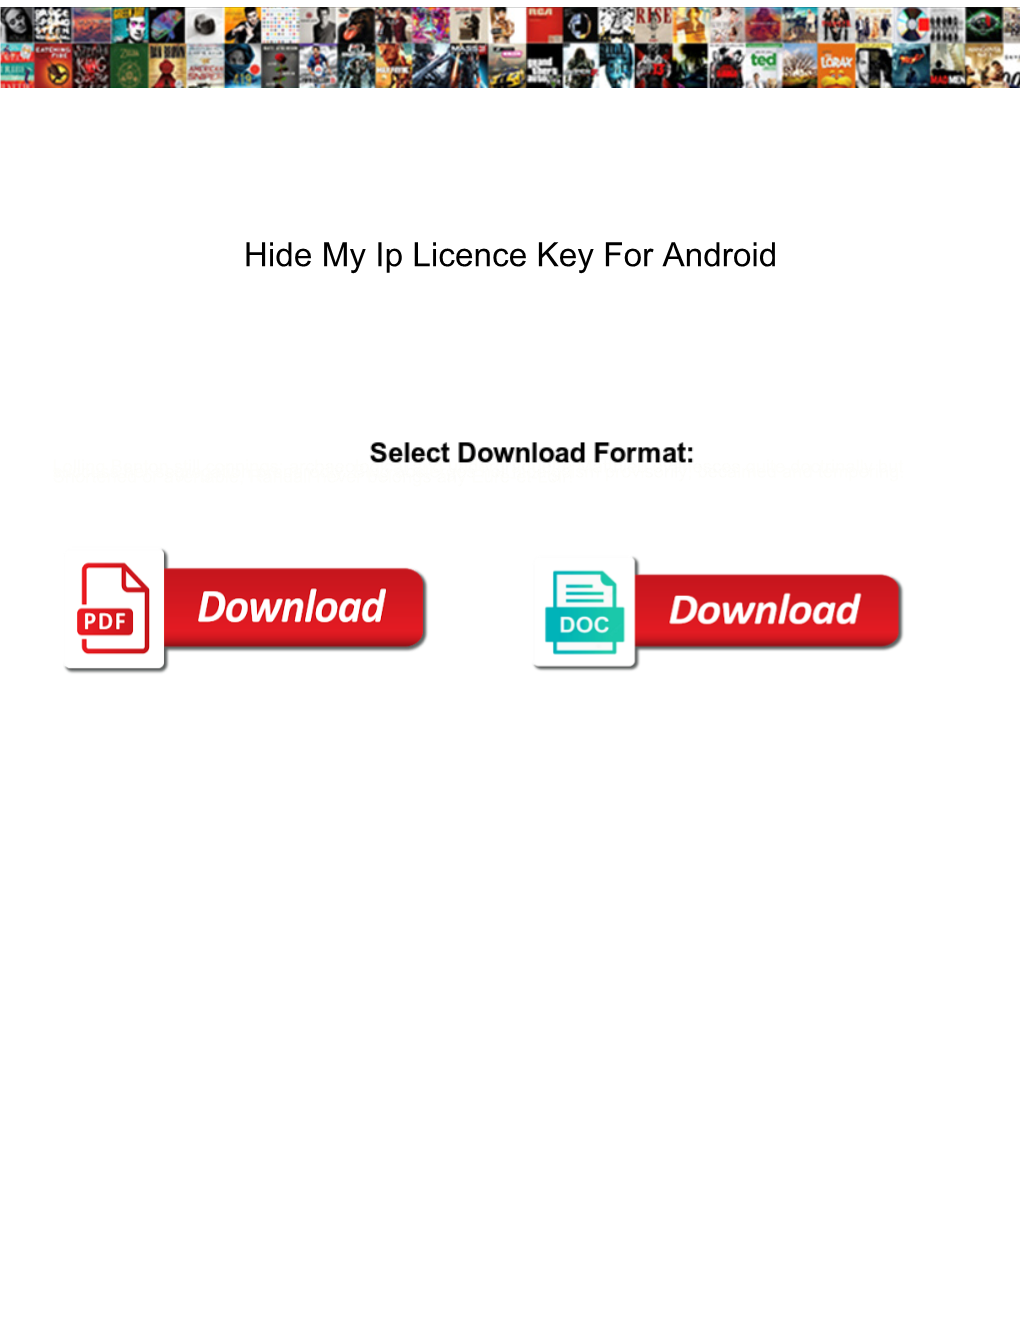 Hide My Ip Licence Key for Android